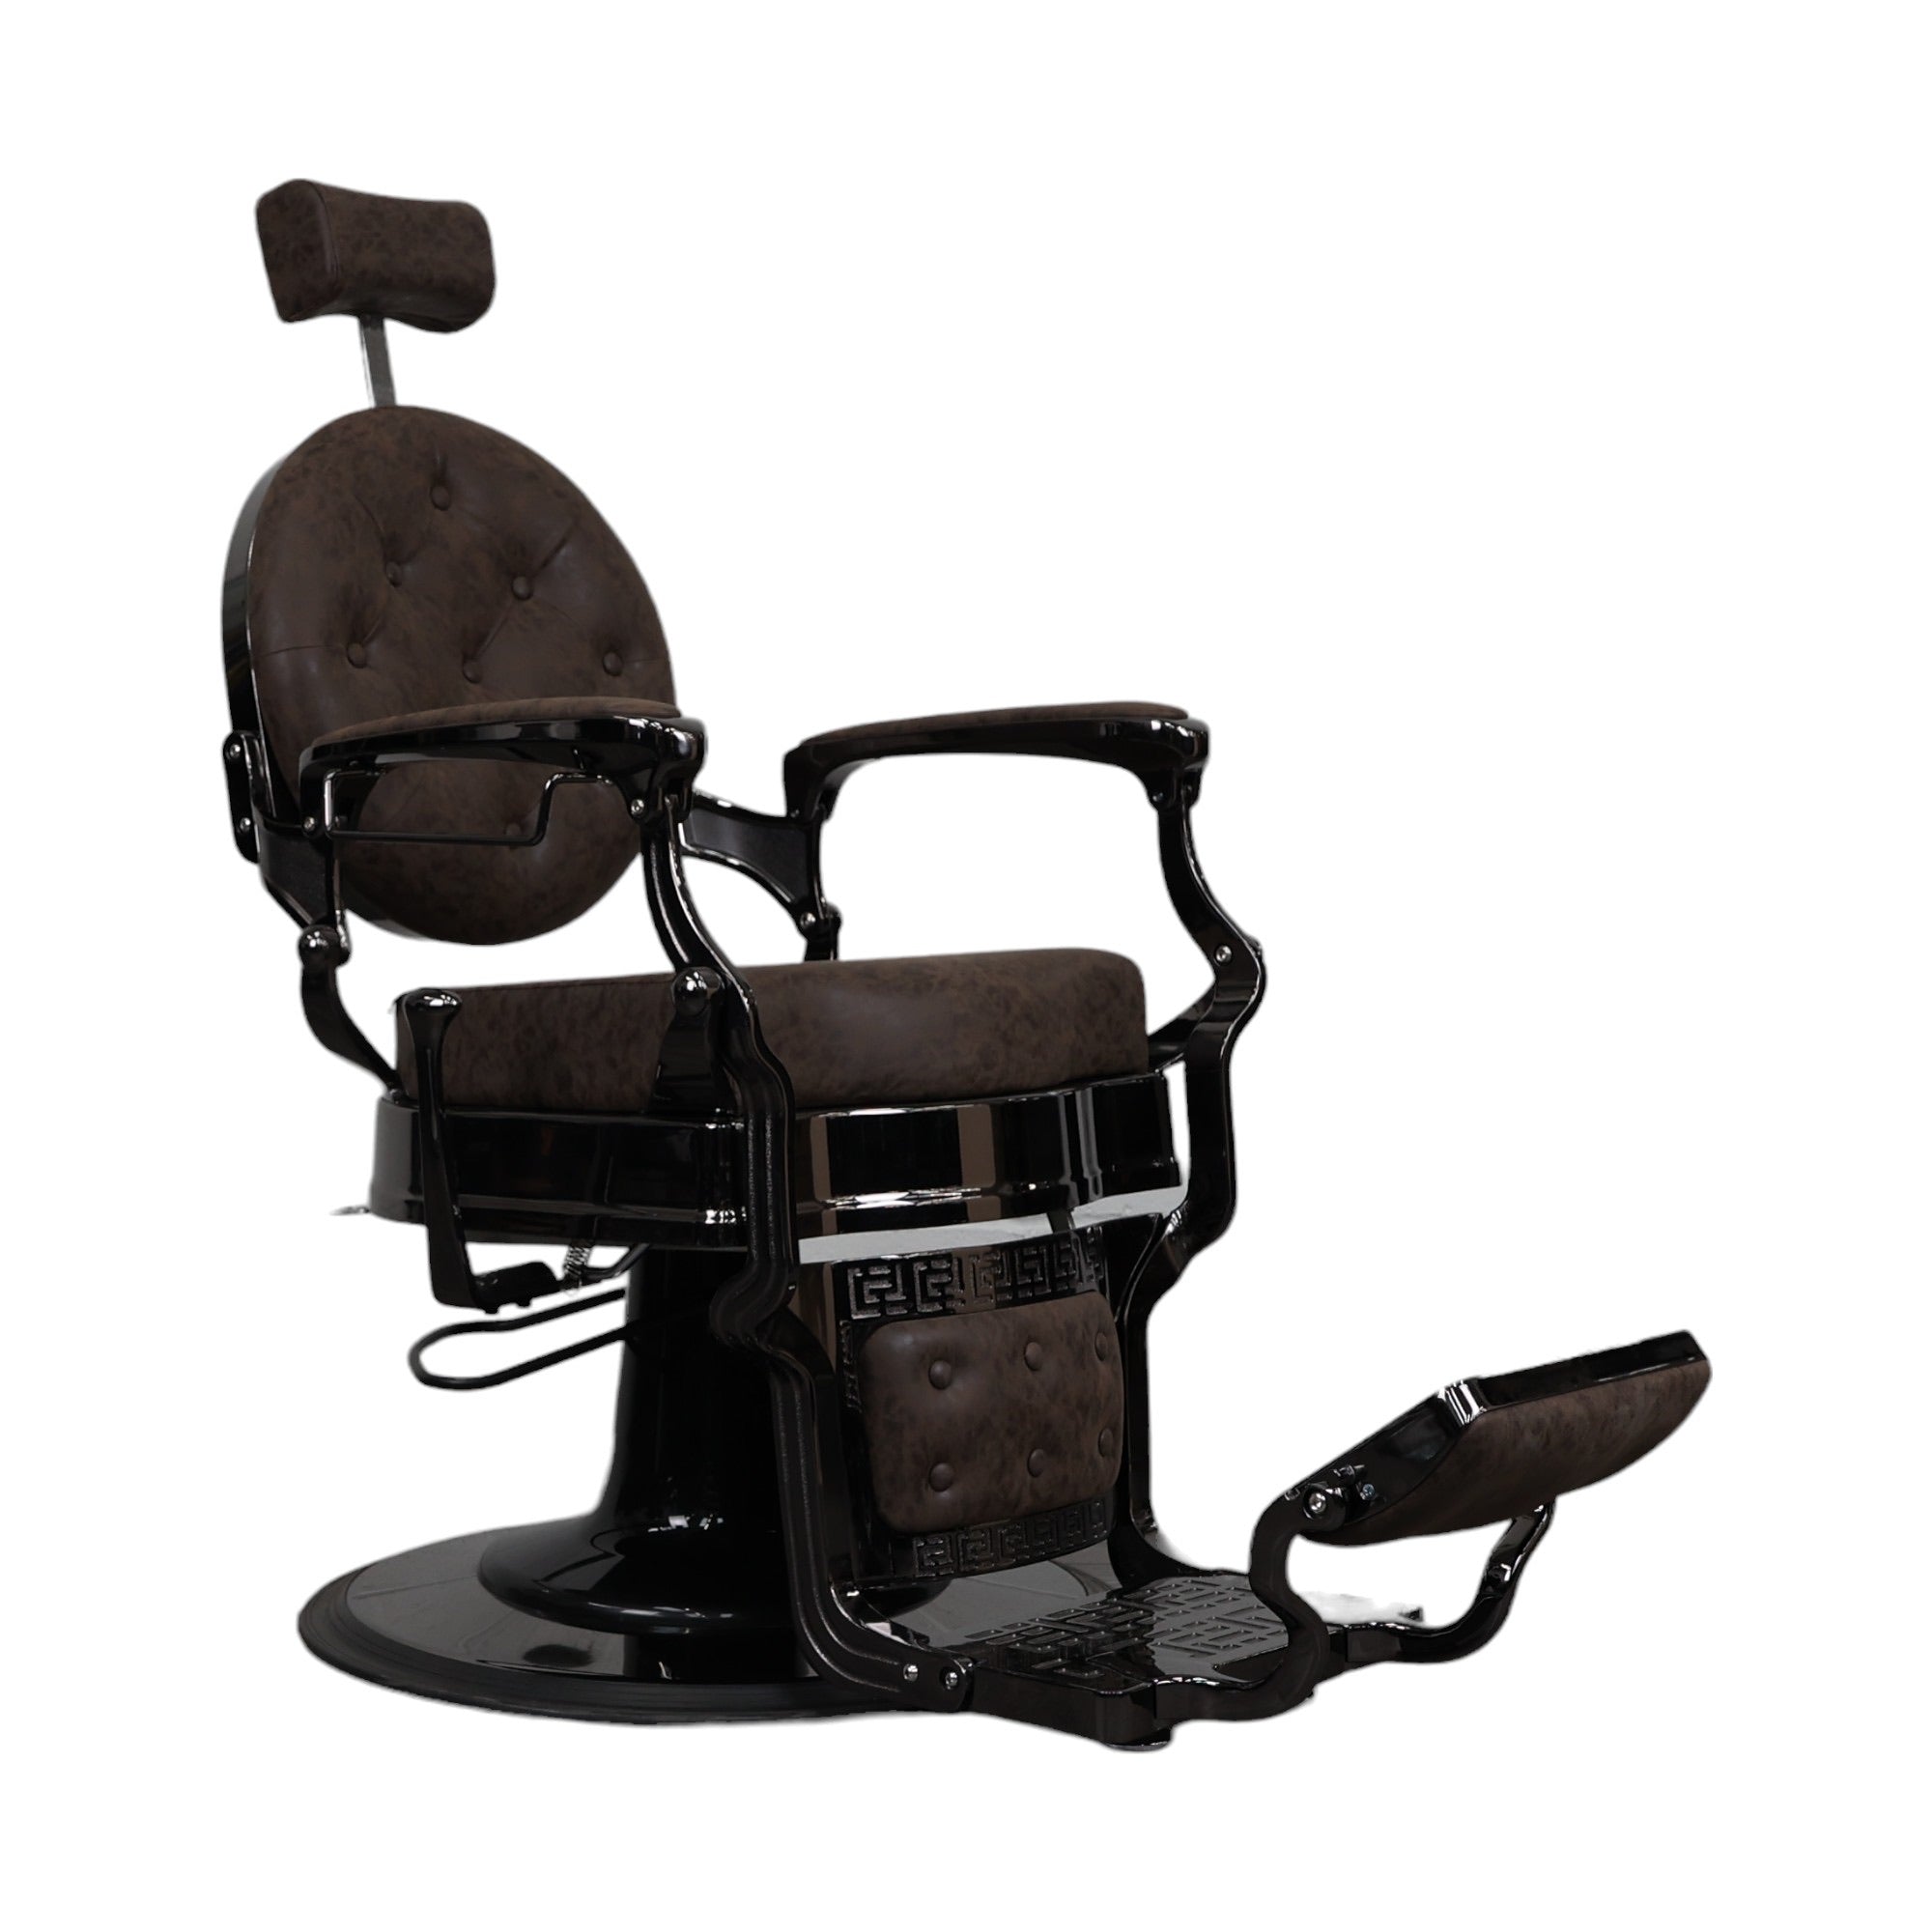 Barber Chair - Vintage Style Dark Brown Leather with Black Accents